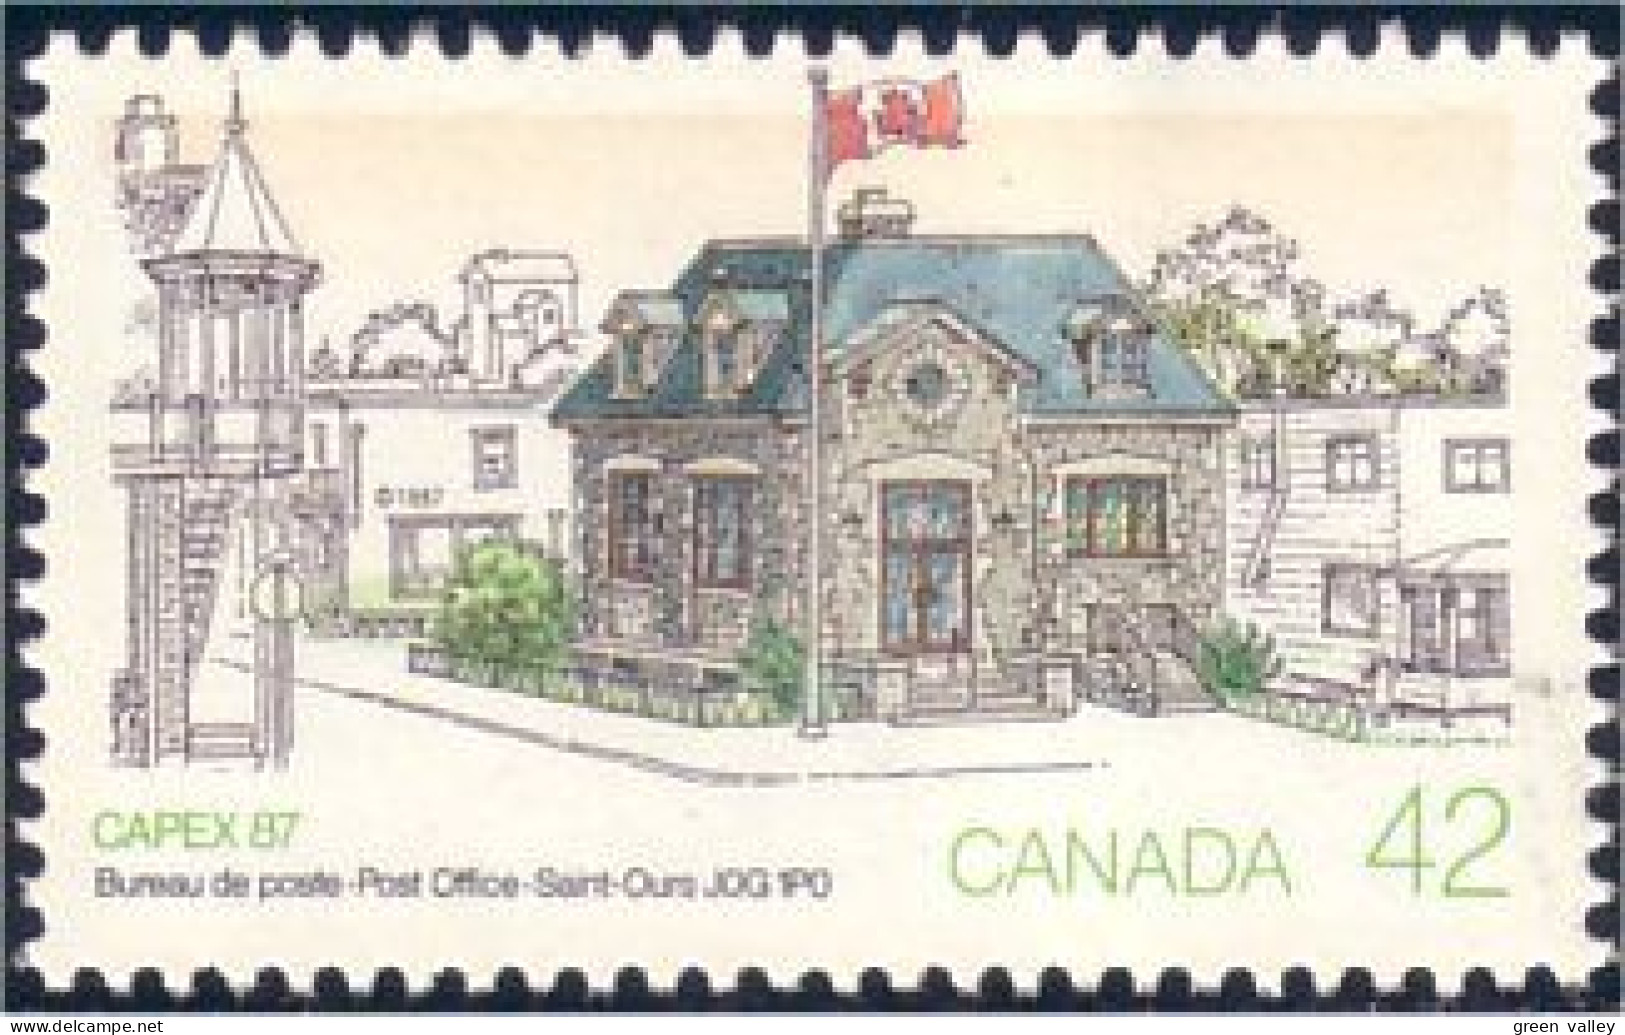 Canada Saint-Ours Post Office Capex 87 MNH ** Neuf SC (C11-25Ada) - Unused Stamps